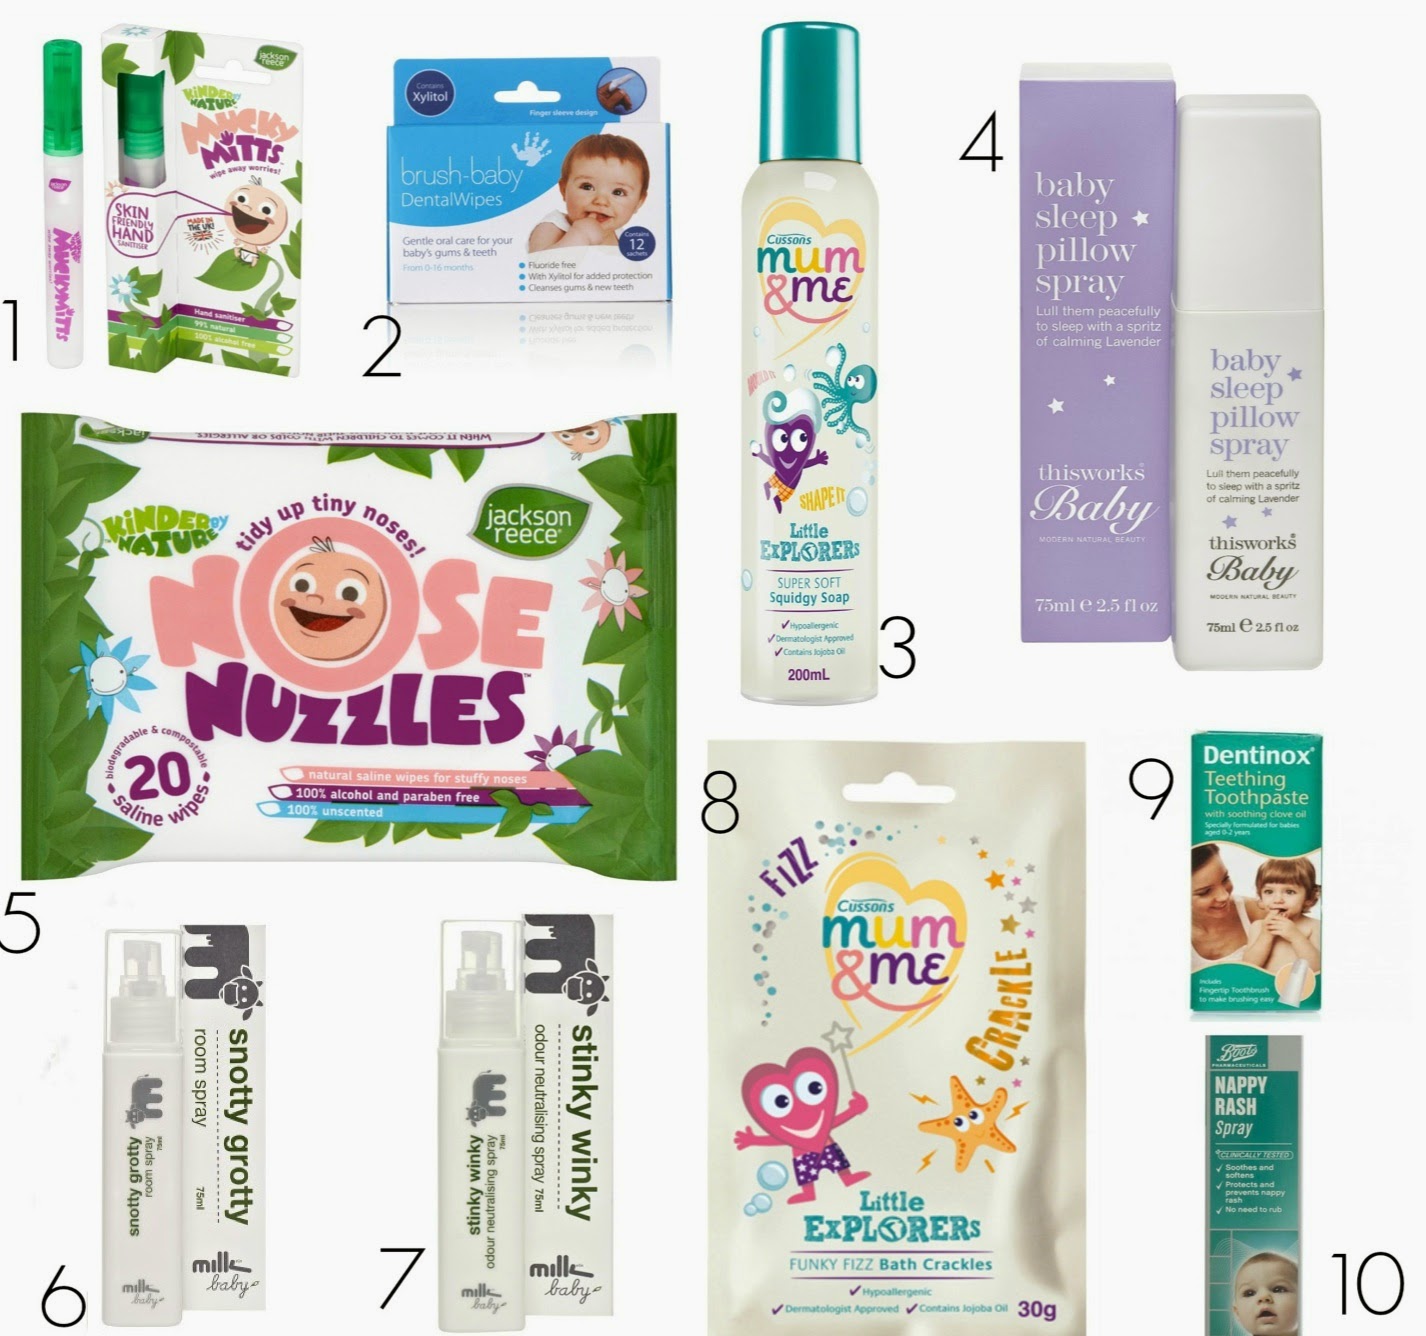 Not your average baby beauty buys - 10 of my fave new finds! | mamasVIB | jackson reece | bay wipes | room spray | this works | pillow spray | any beauty products | bath time | bedtime routine | beauty | baby | cussons | mum and me | soap | shampoo | denitonox | teething | toothpaste | nose wipes | mamasVIb | 